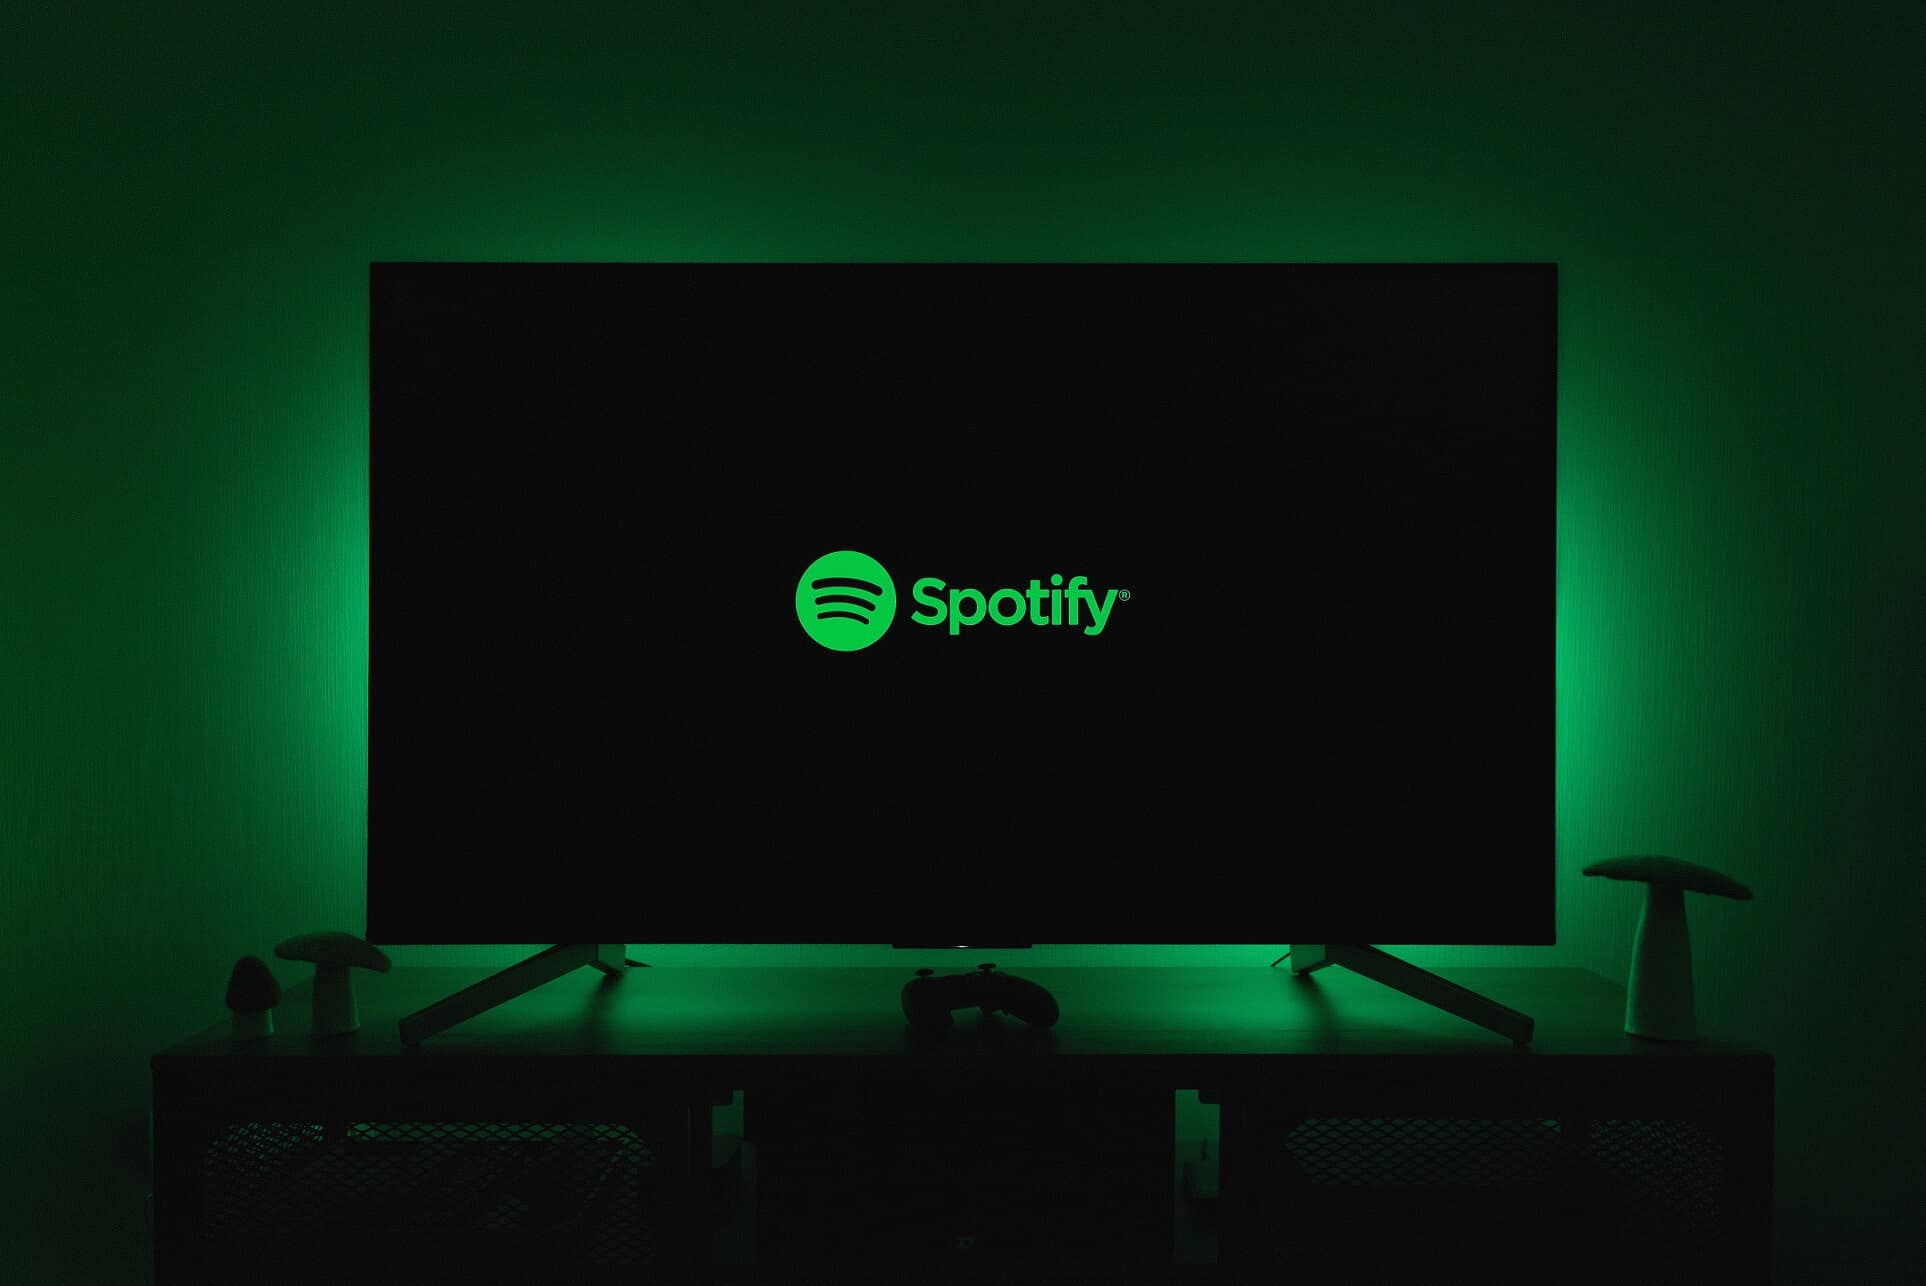 SavingSpot reveal the countries that get best value for Spotify subscriptions